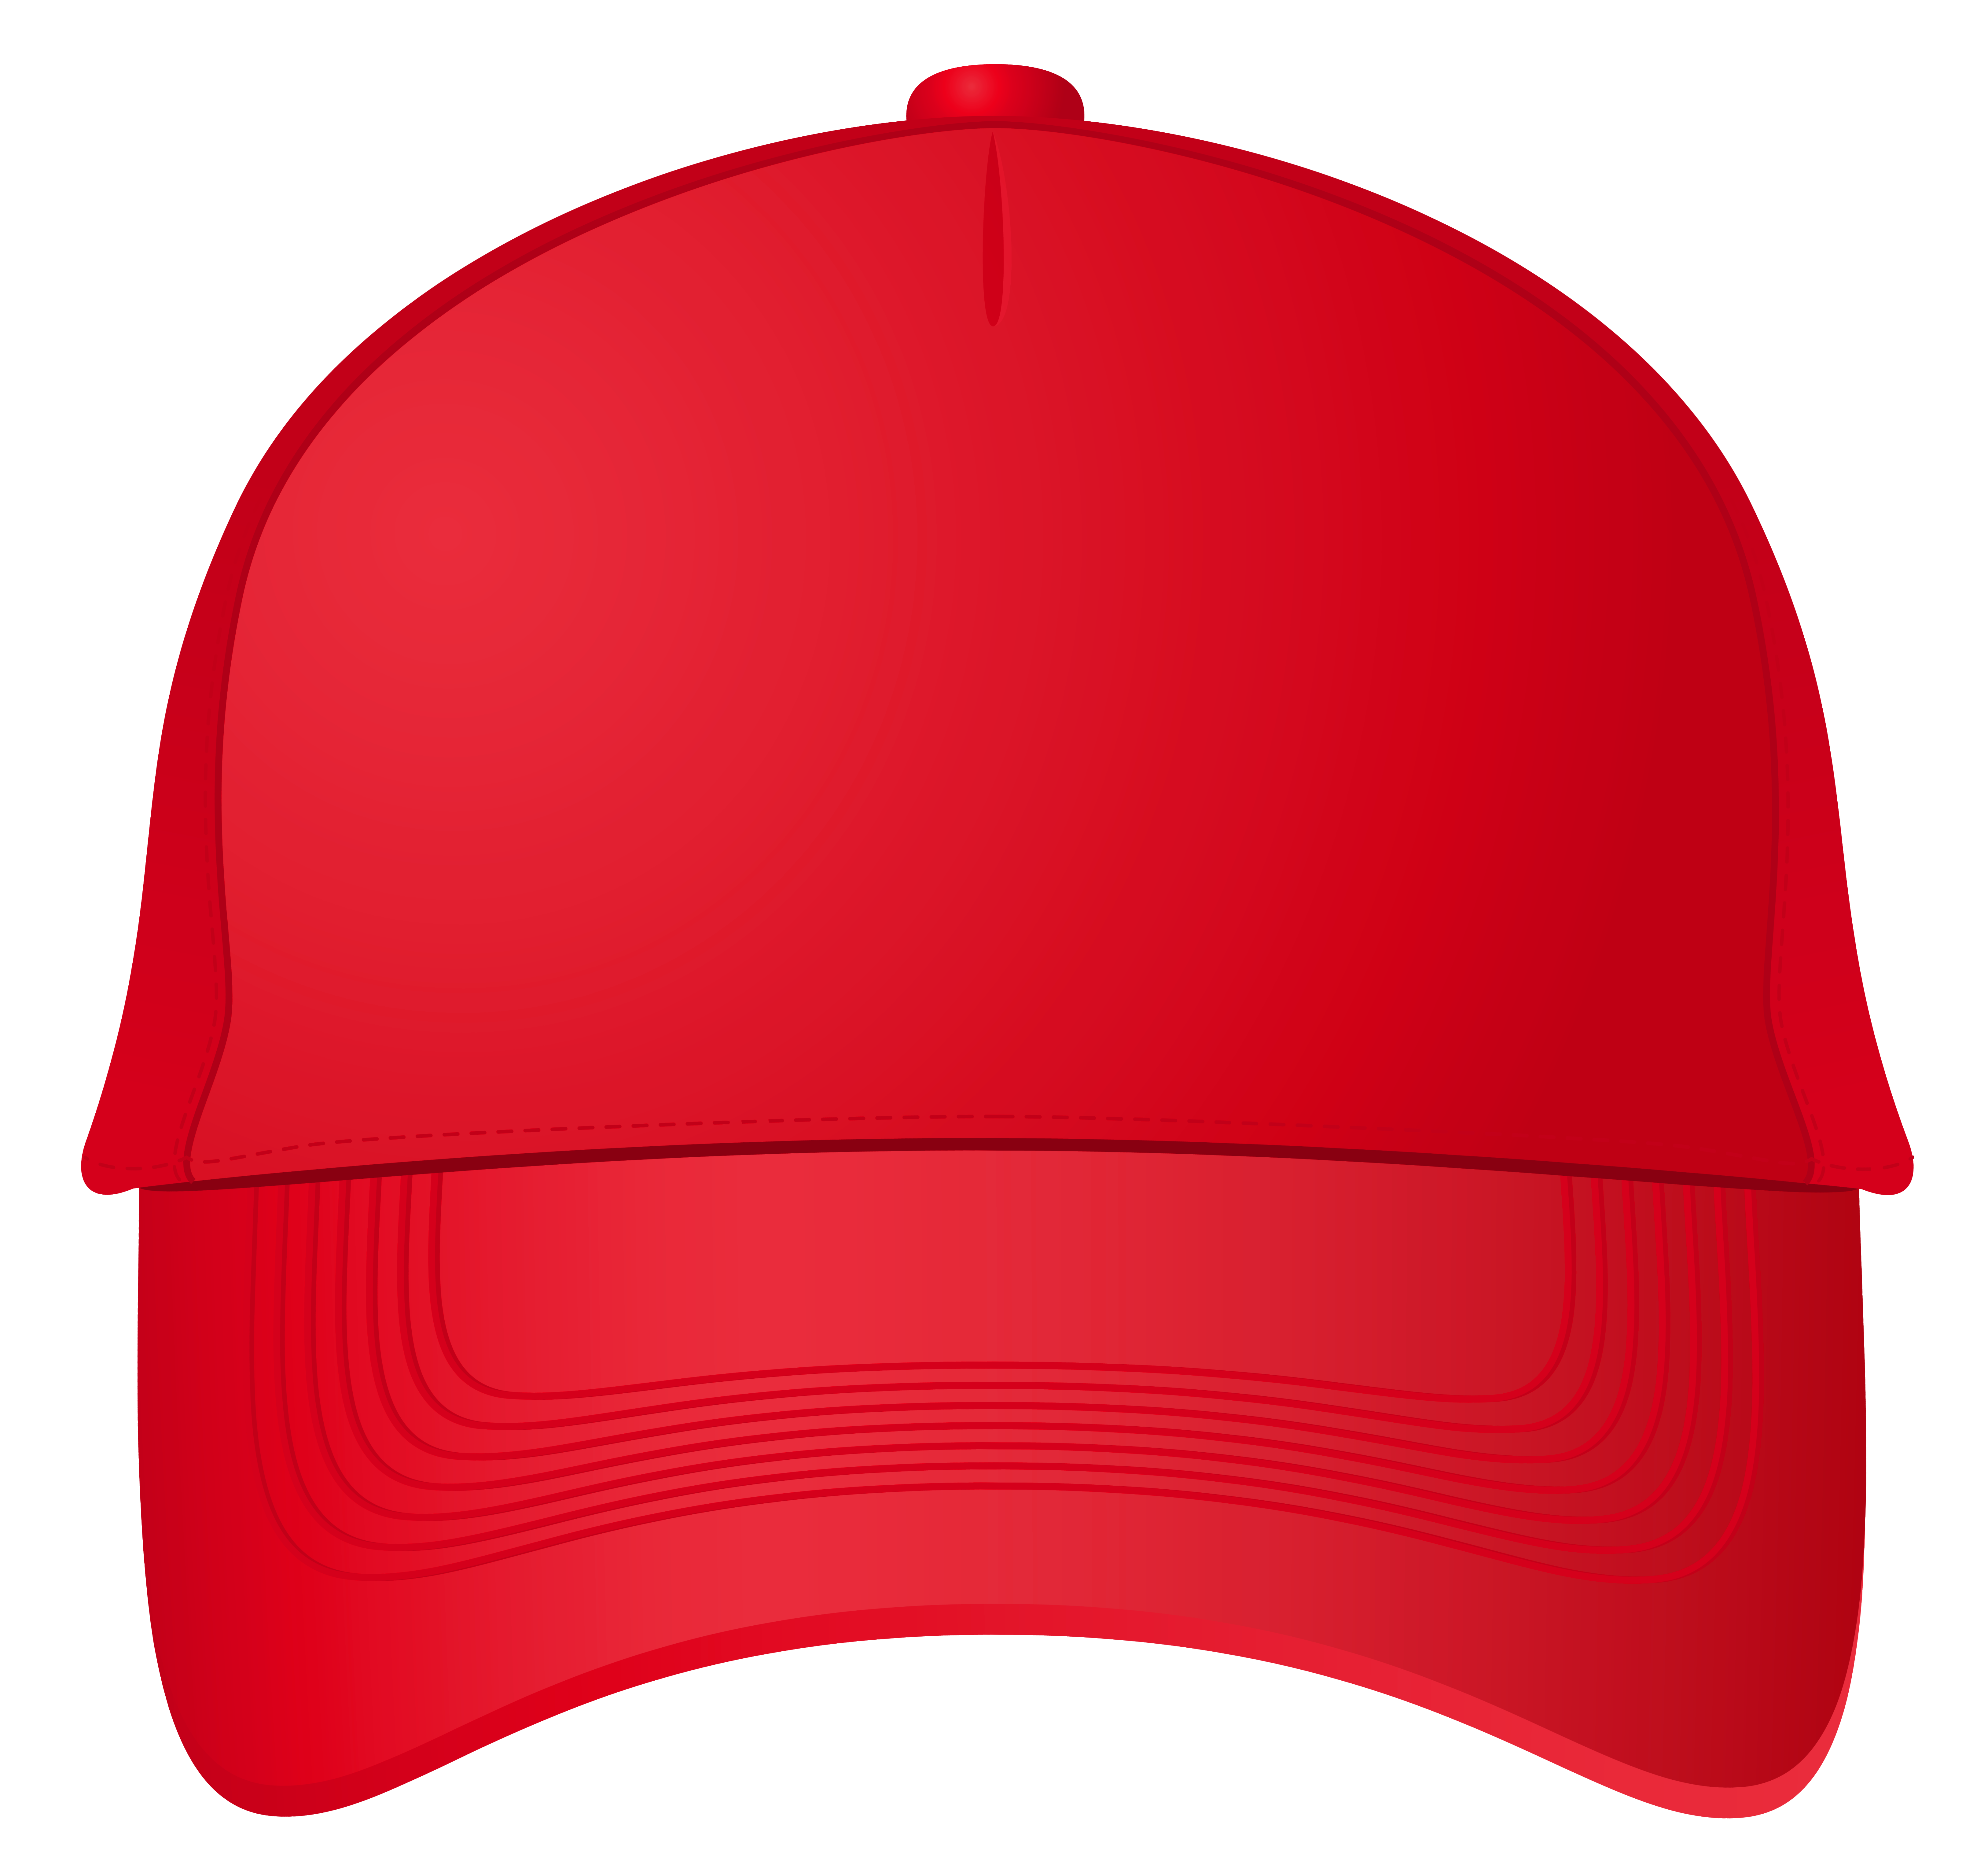 Red Baseball Cap PNG Transparent Background, Free Download #35360 -  FreeIconsPNG